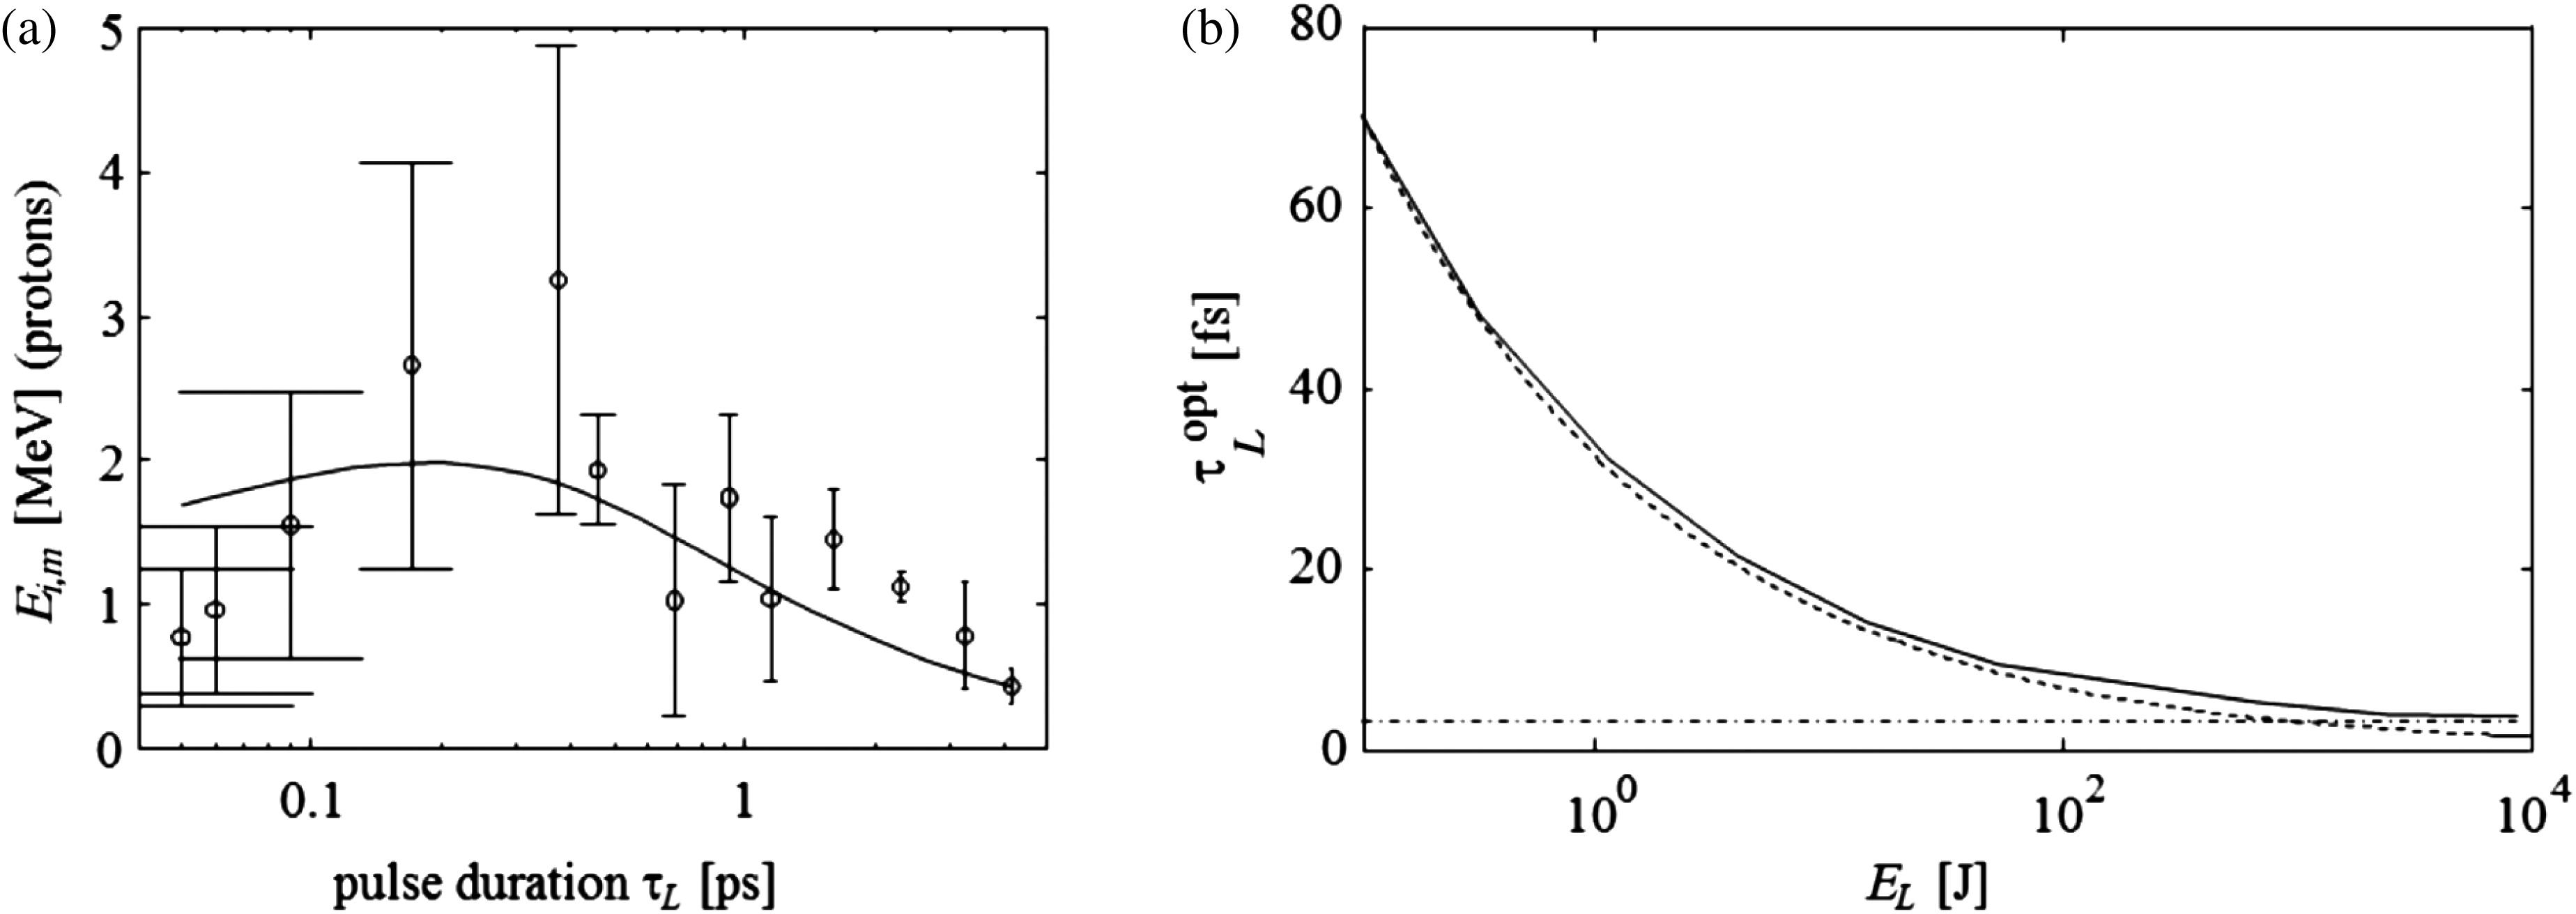 (a) Experimental data from Schreiber et al.[57] and the prediction of the nonrelativistic TNSA model. (b) Optimal pulse duration for the specific example of , , for the nonrelativistic consideration (Equation (12), dashed) and the relativistic consideration (Equation (29), solid). The ultra-relativistic limit is given by the dash-dotted line. For larger the curves are globally shifted to respective larger optimal pulse durations.